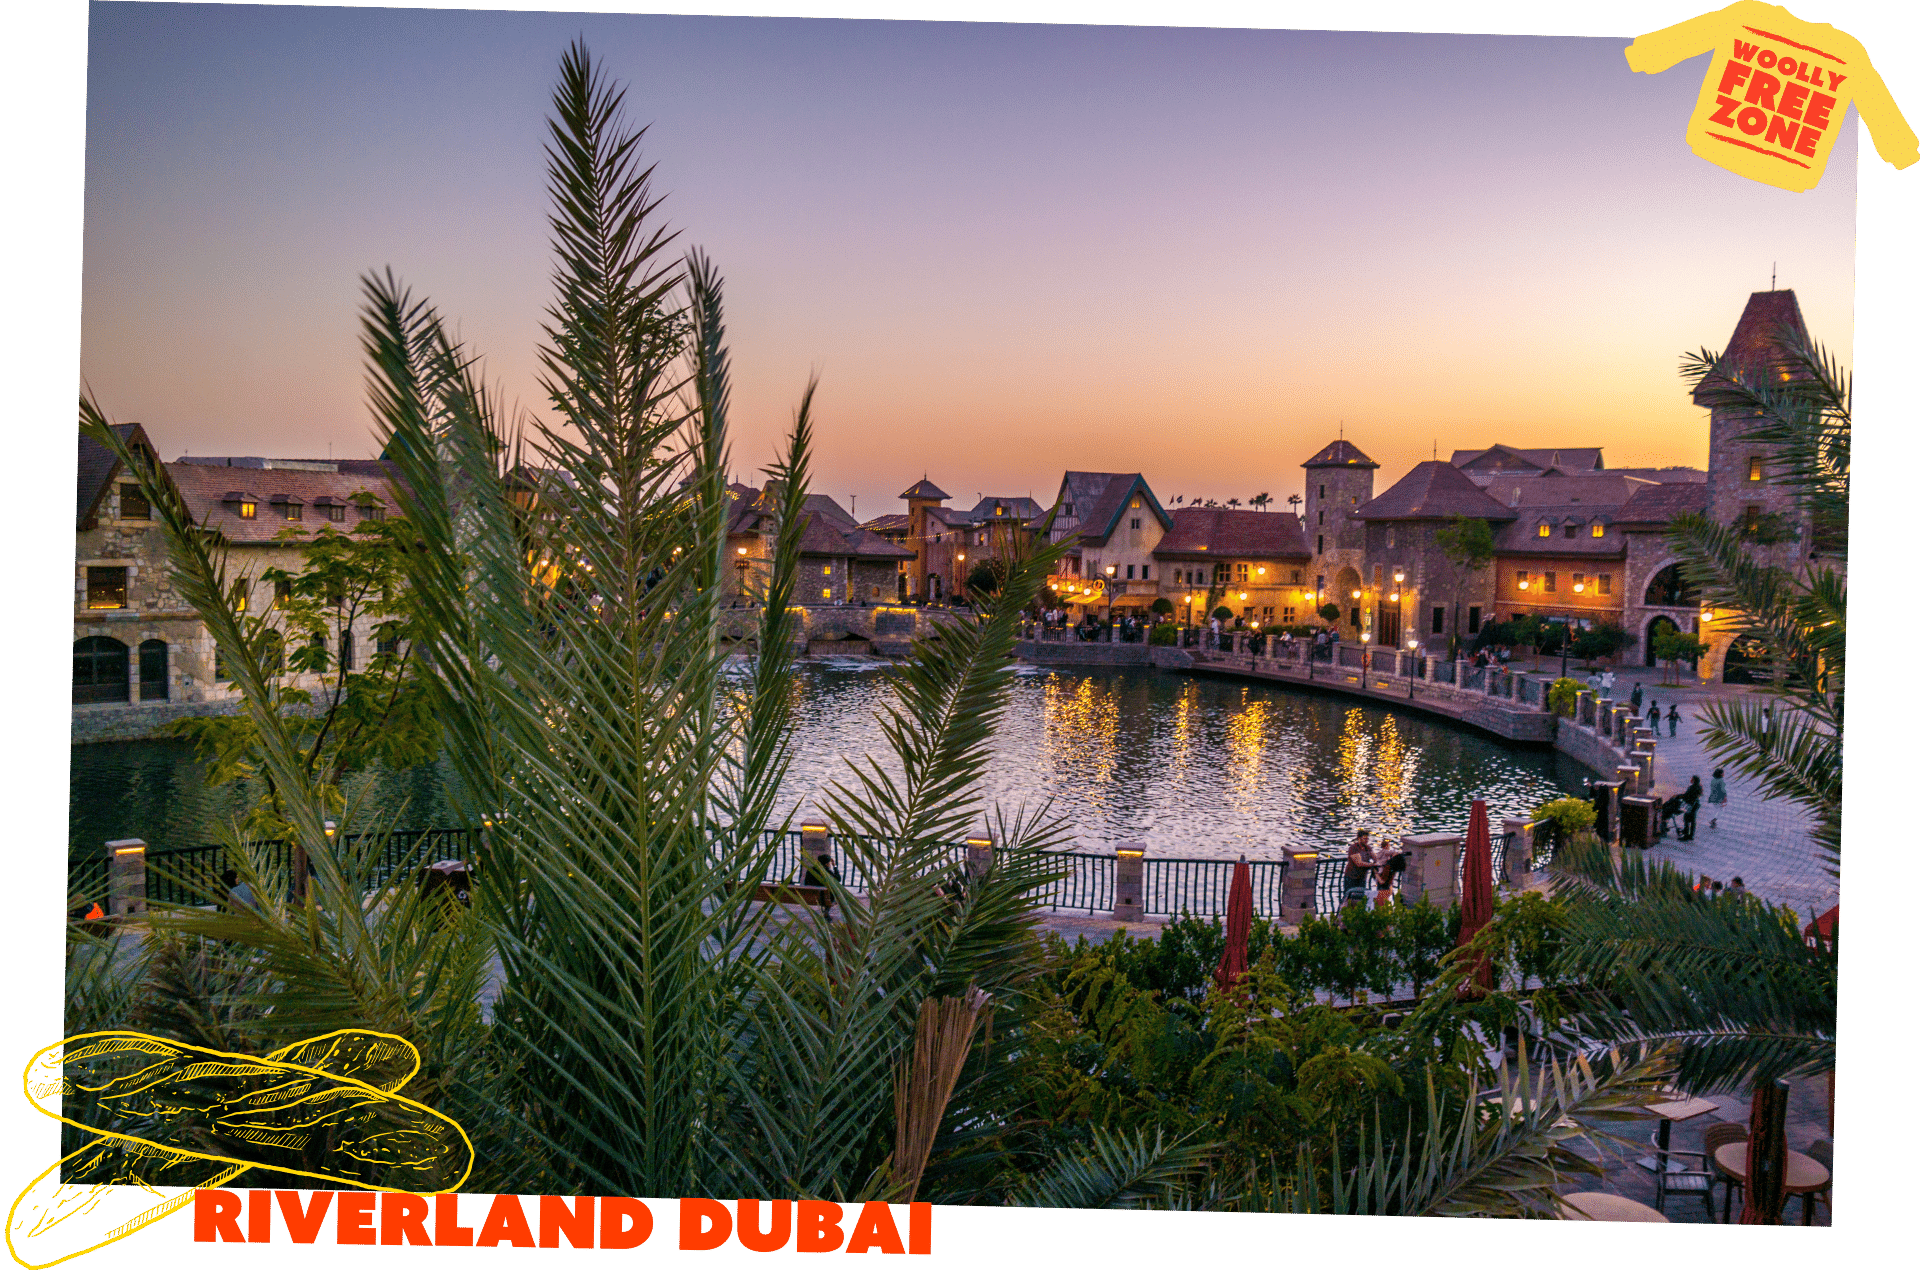 Riverland Dubai is one of the best free winter activities in Dubai. A sunset shot over a river in the French Village section of Riverland Dubai.